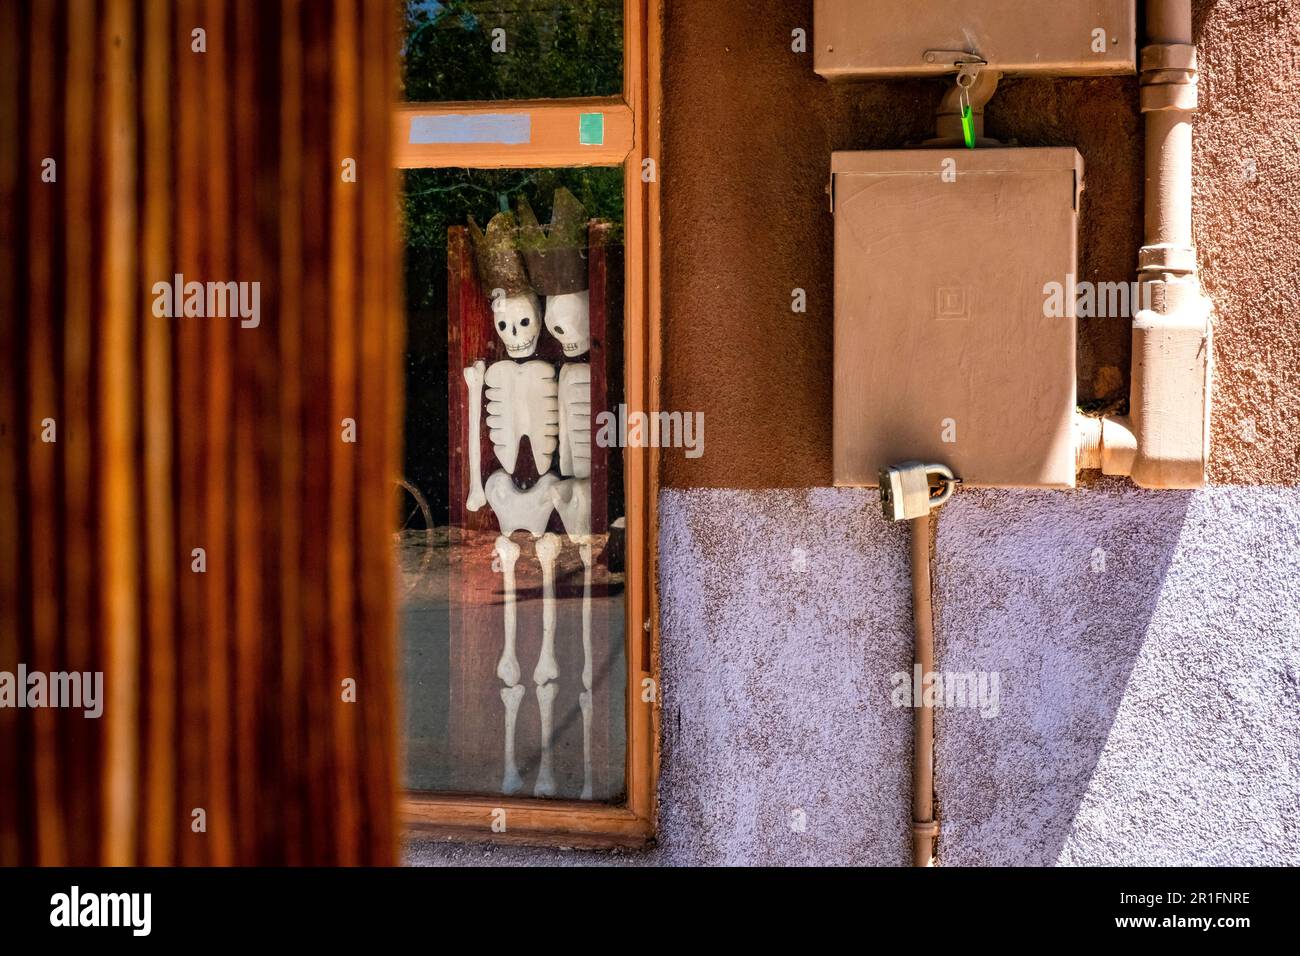 Wooden skeletons at an art gallery in Cerrillos, New Mexico, USA Stock Photo